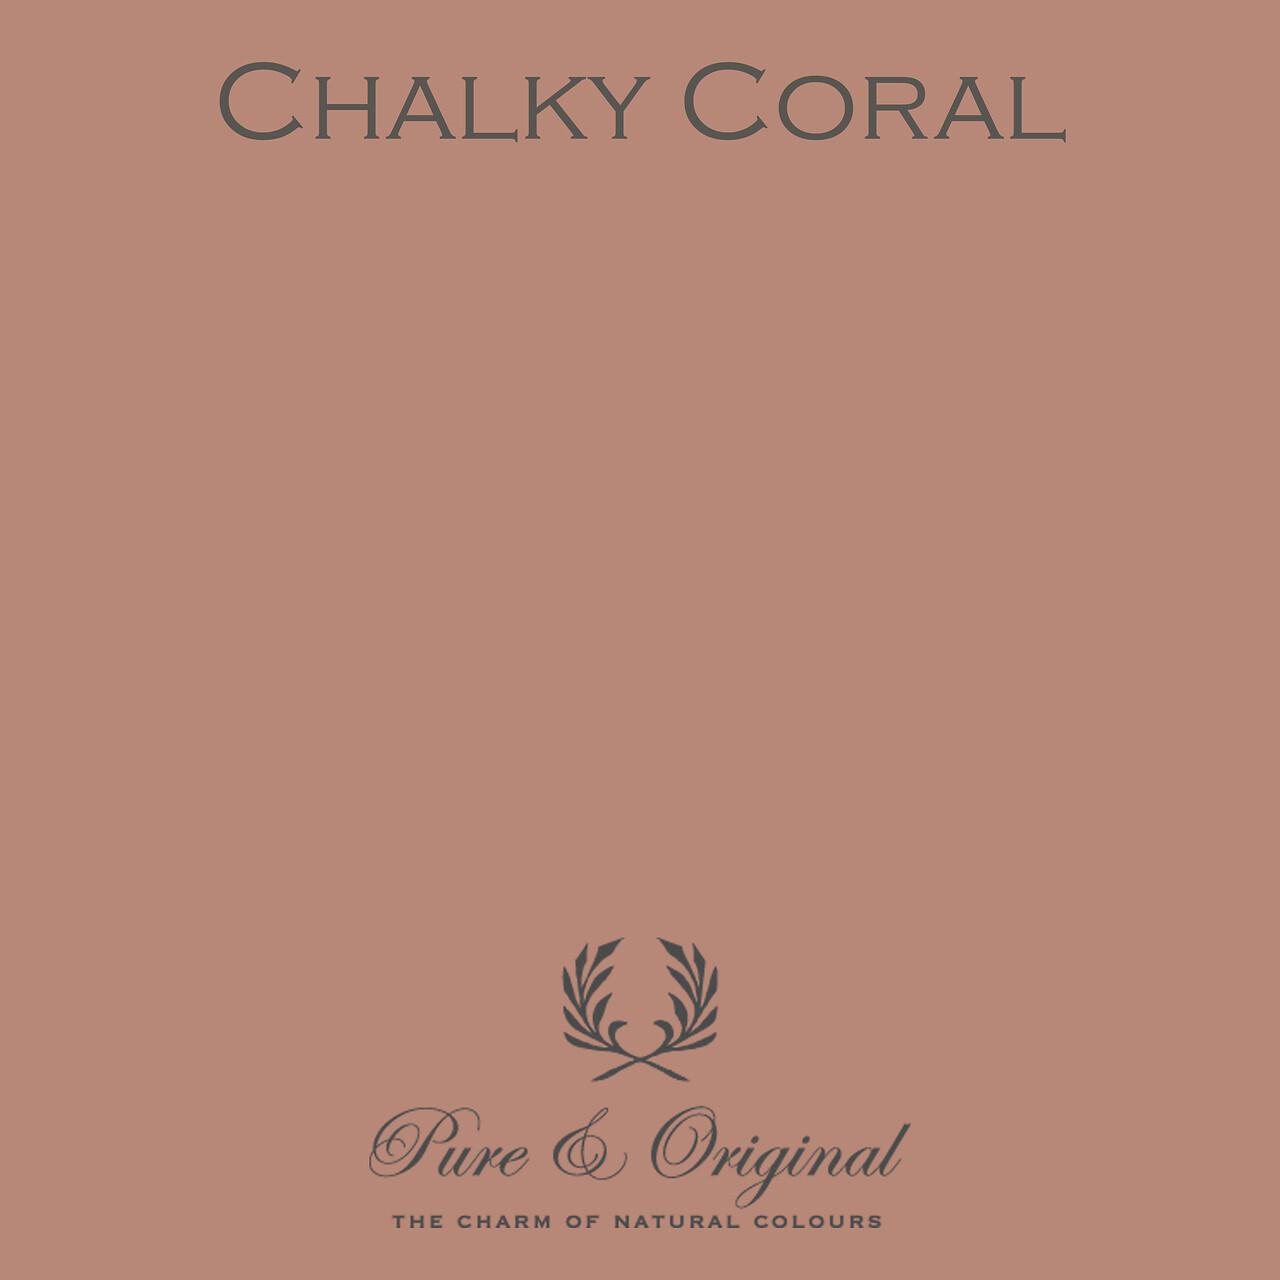 Chalky Coral Carazzo